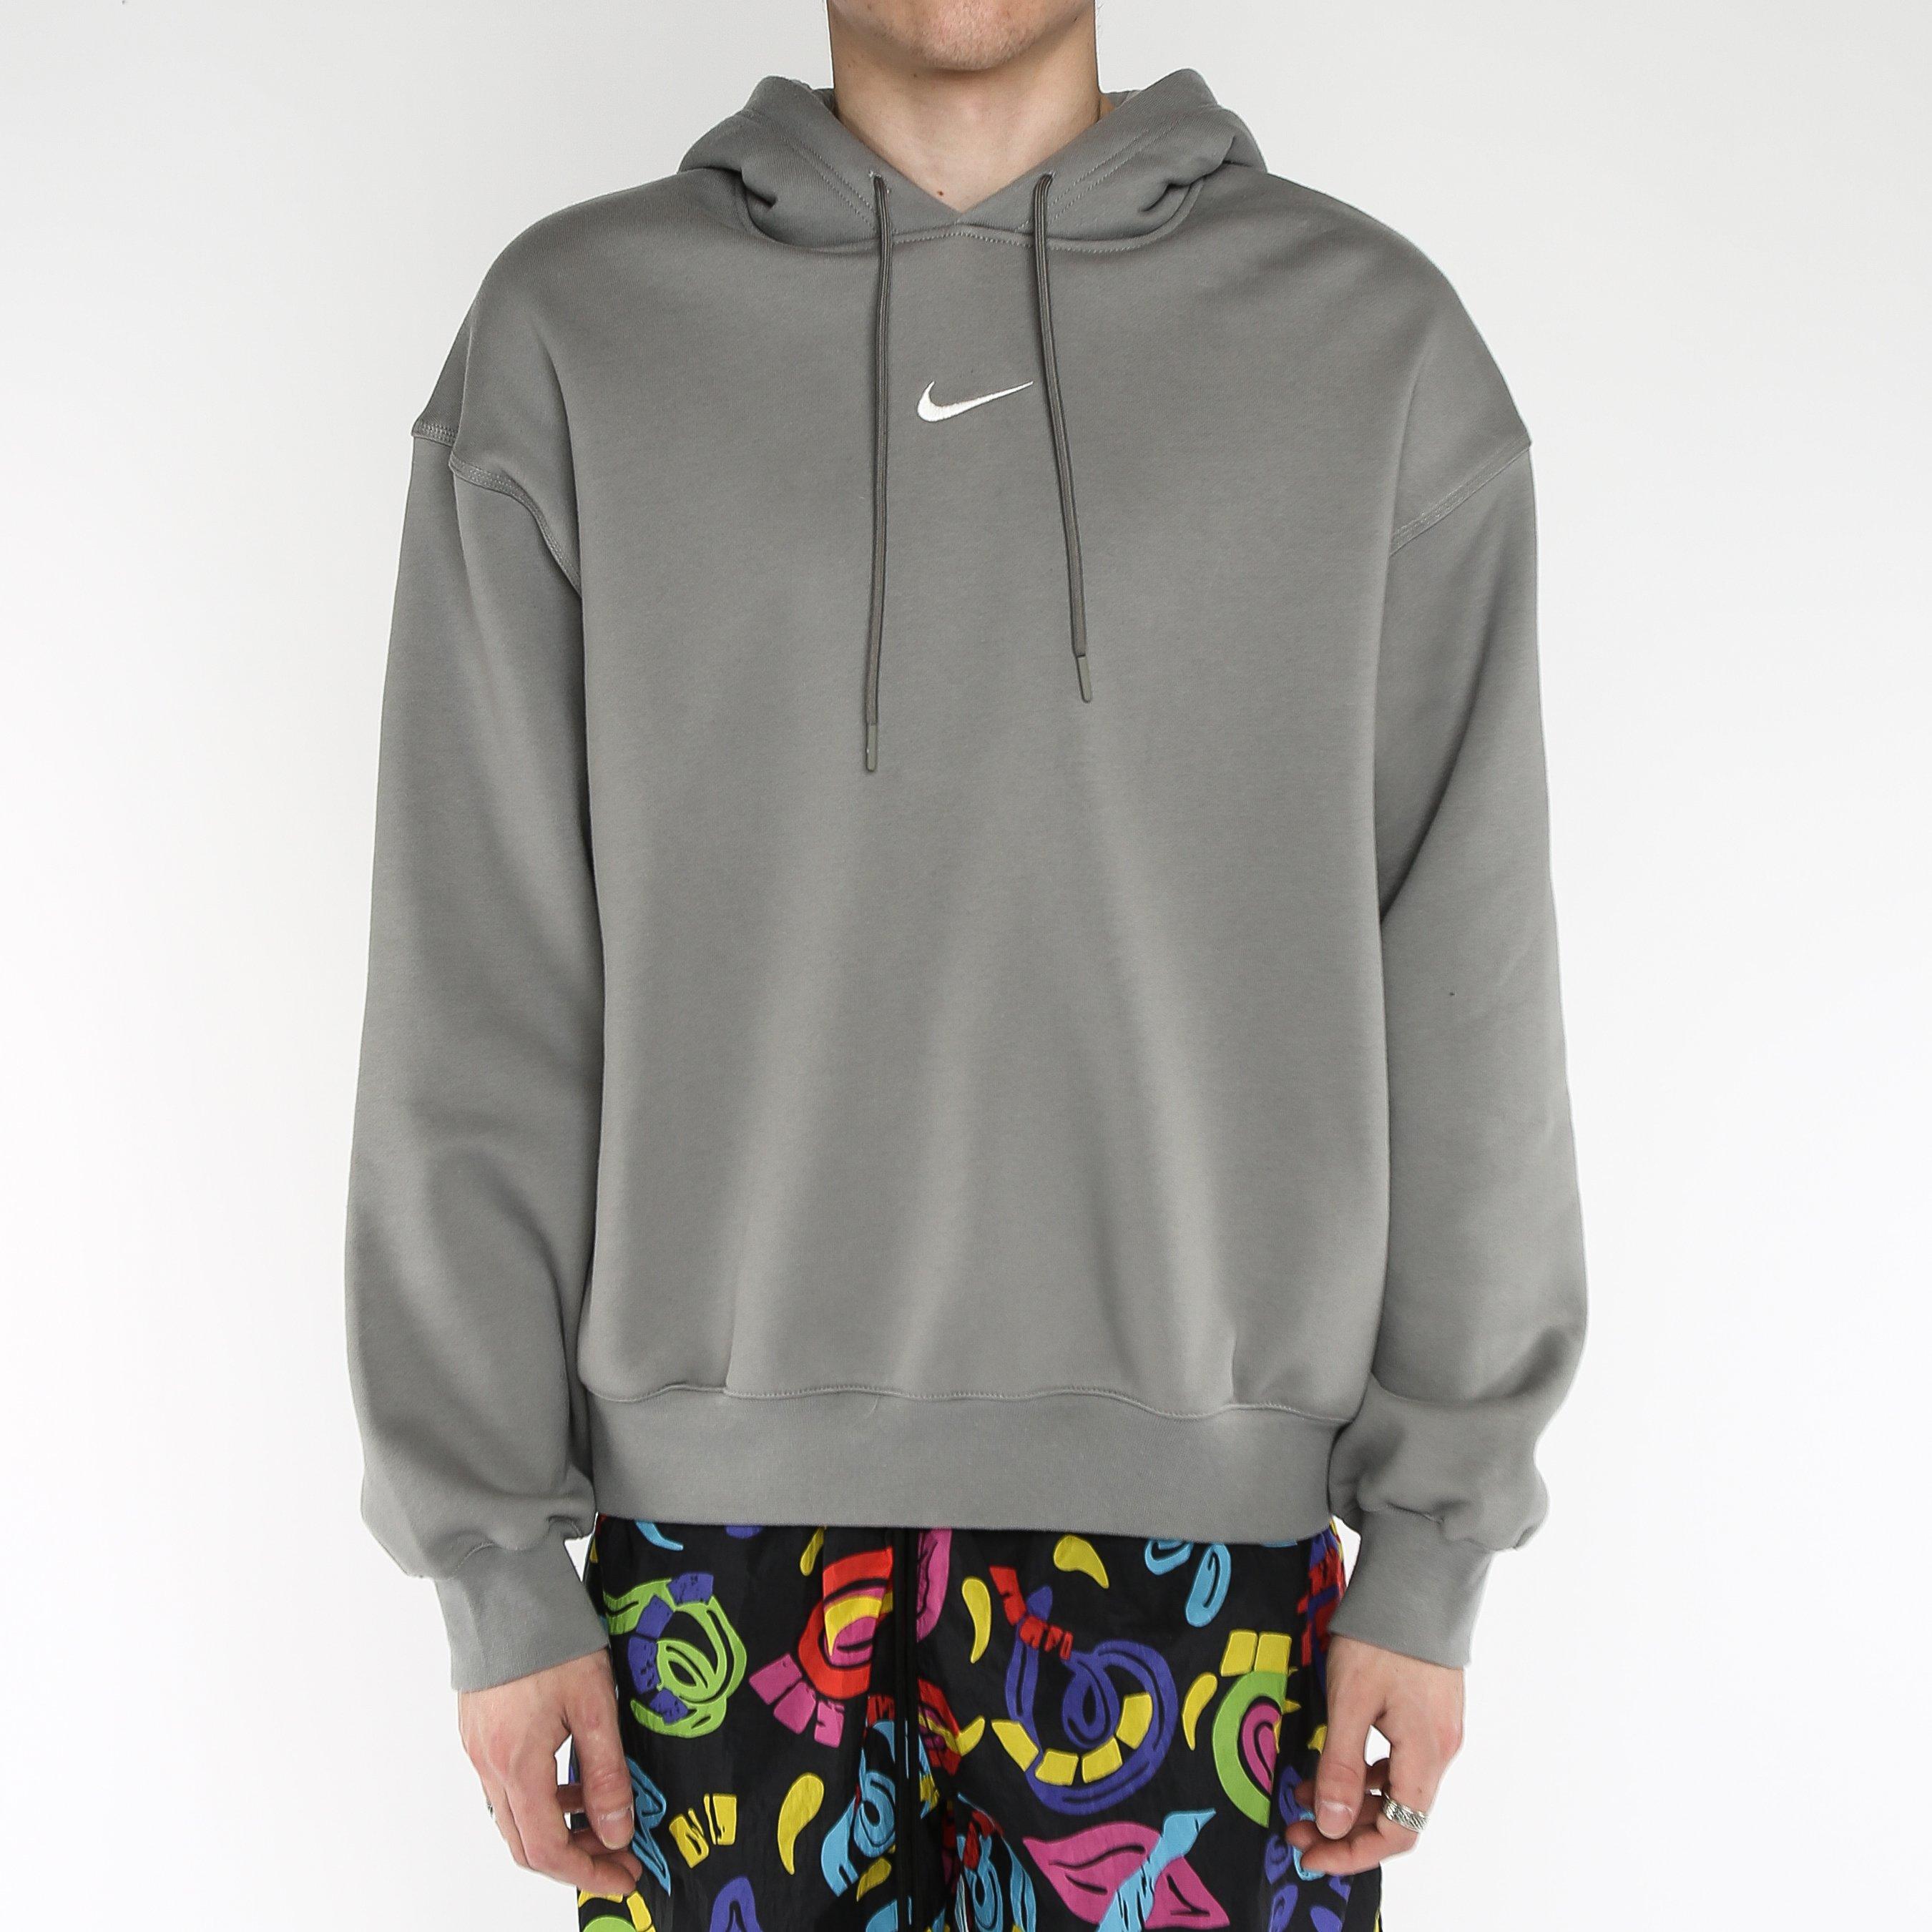 Nike Cotton Fear Of God Hoodie in Gray 